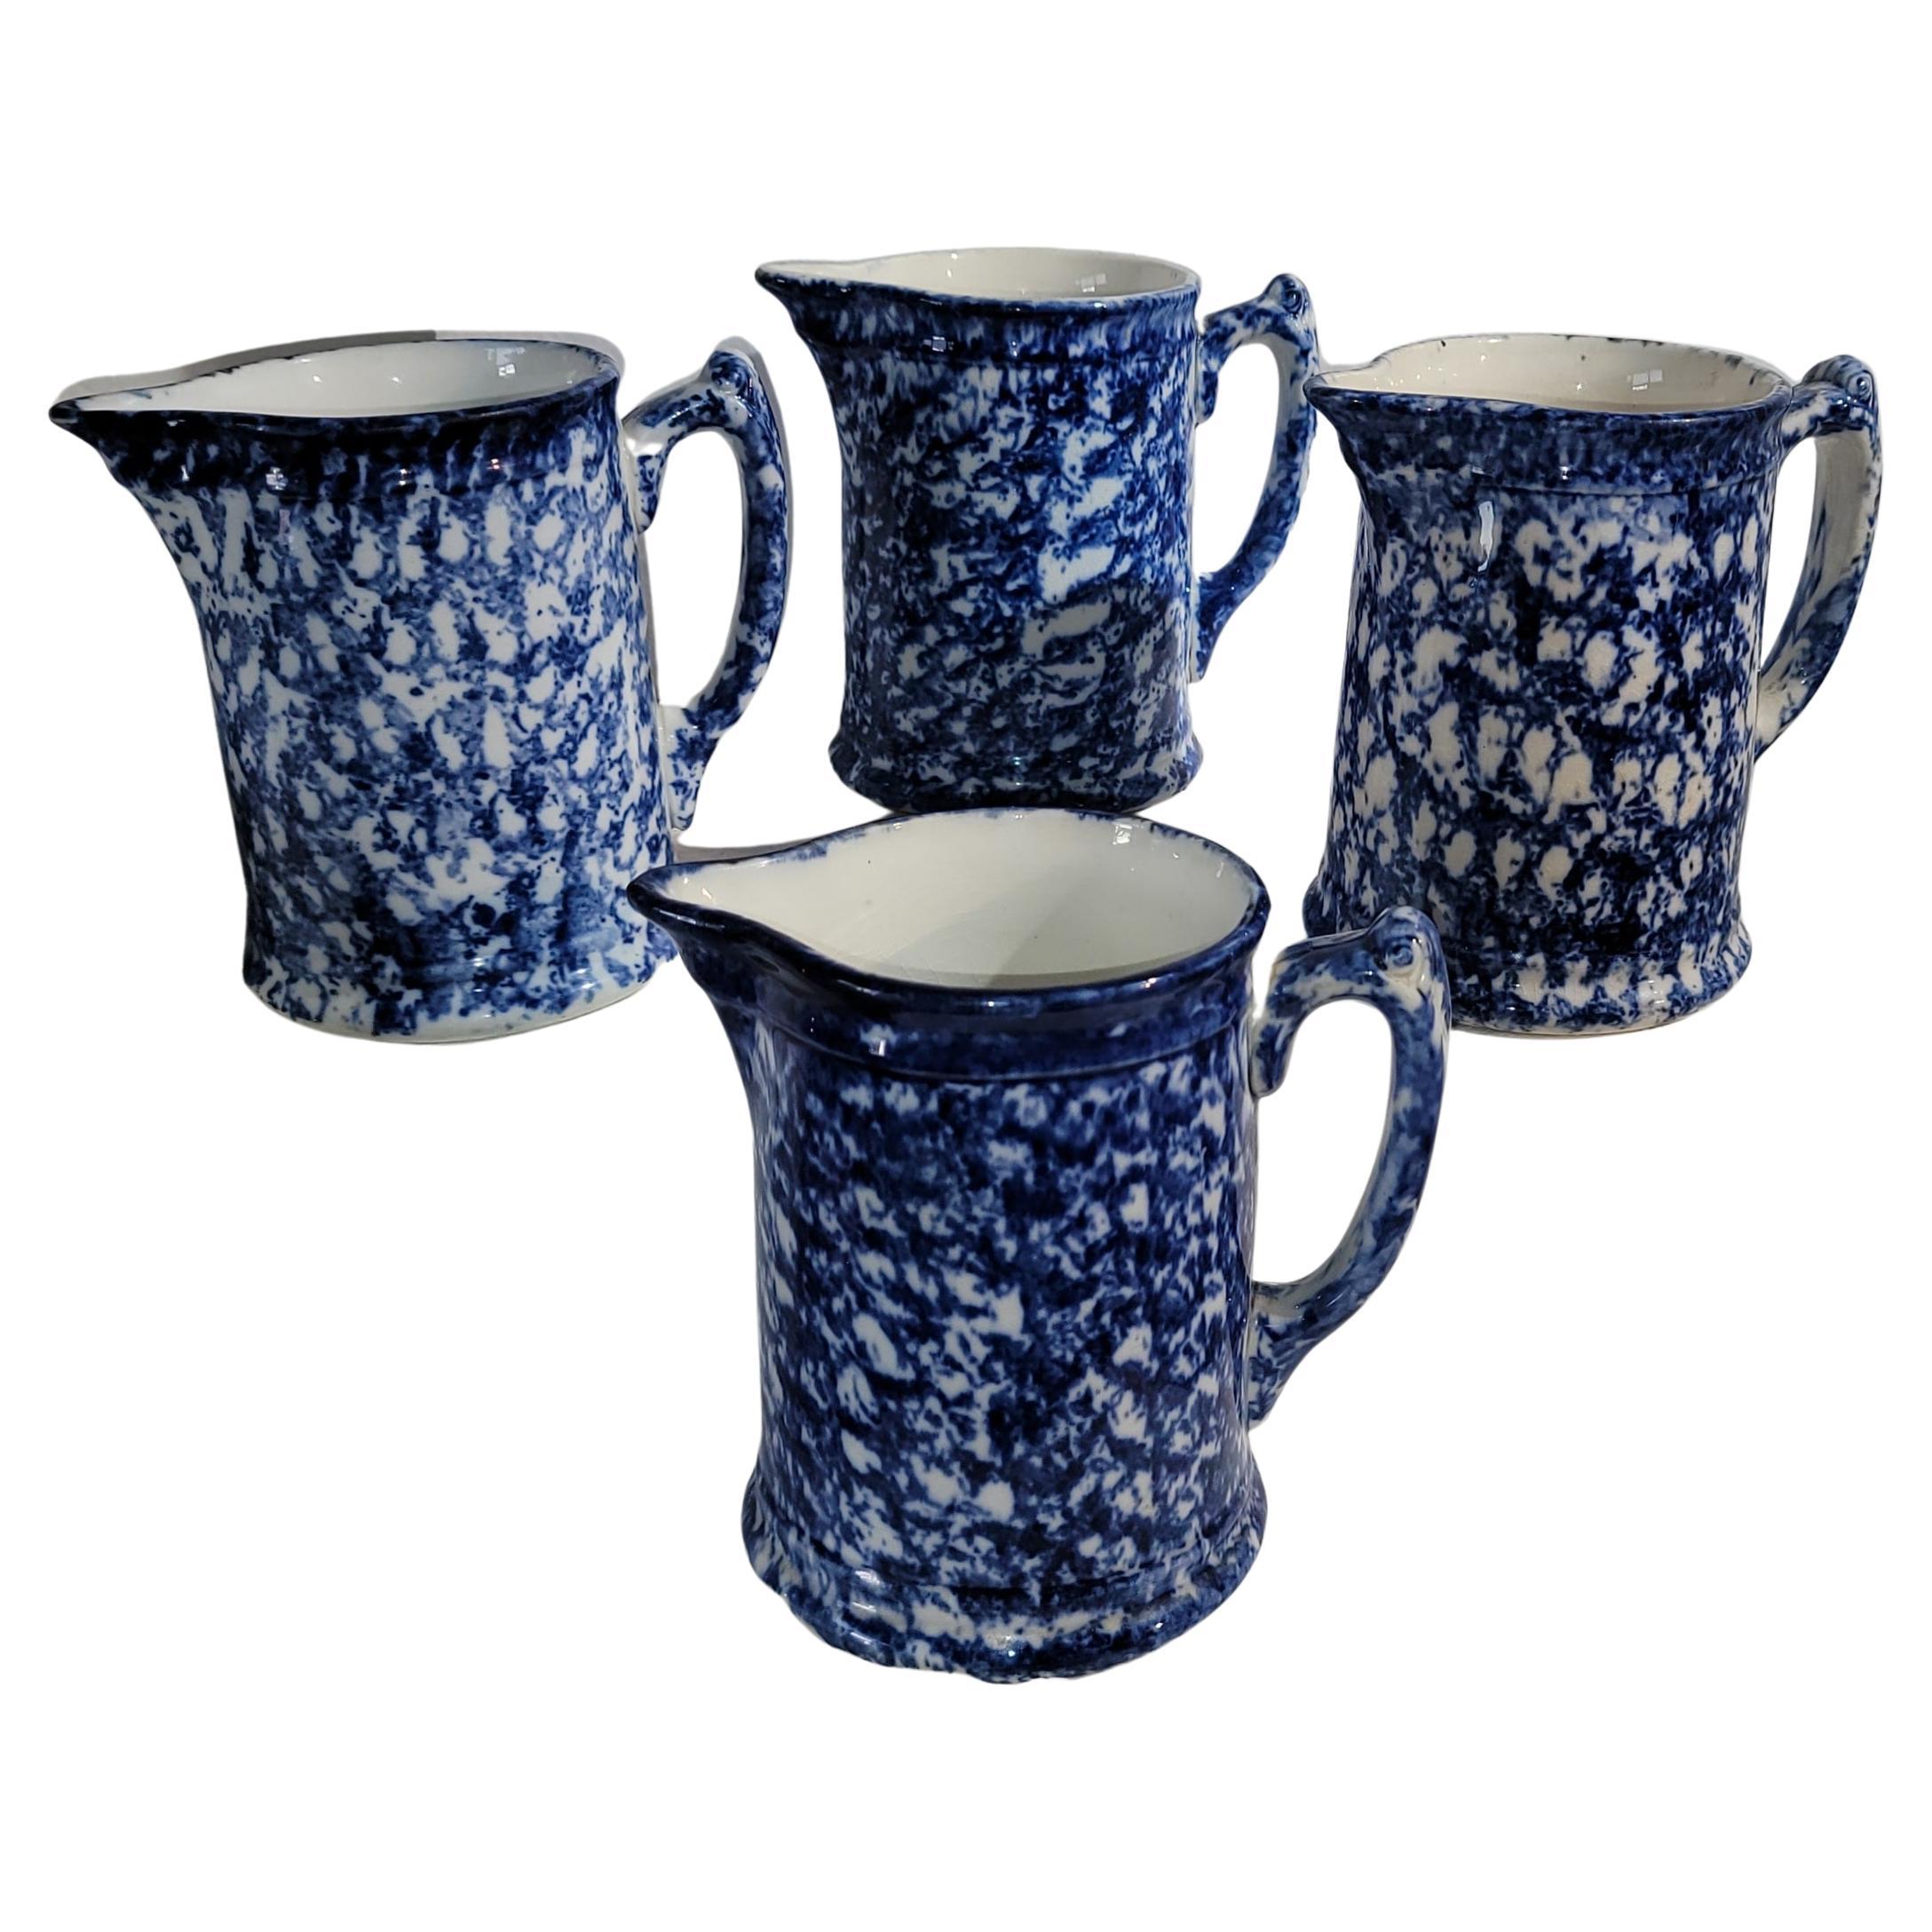 19thc Sponge Ware Blue & White Pitchers Collection, 4